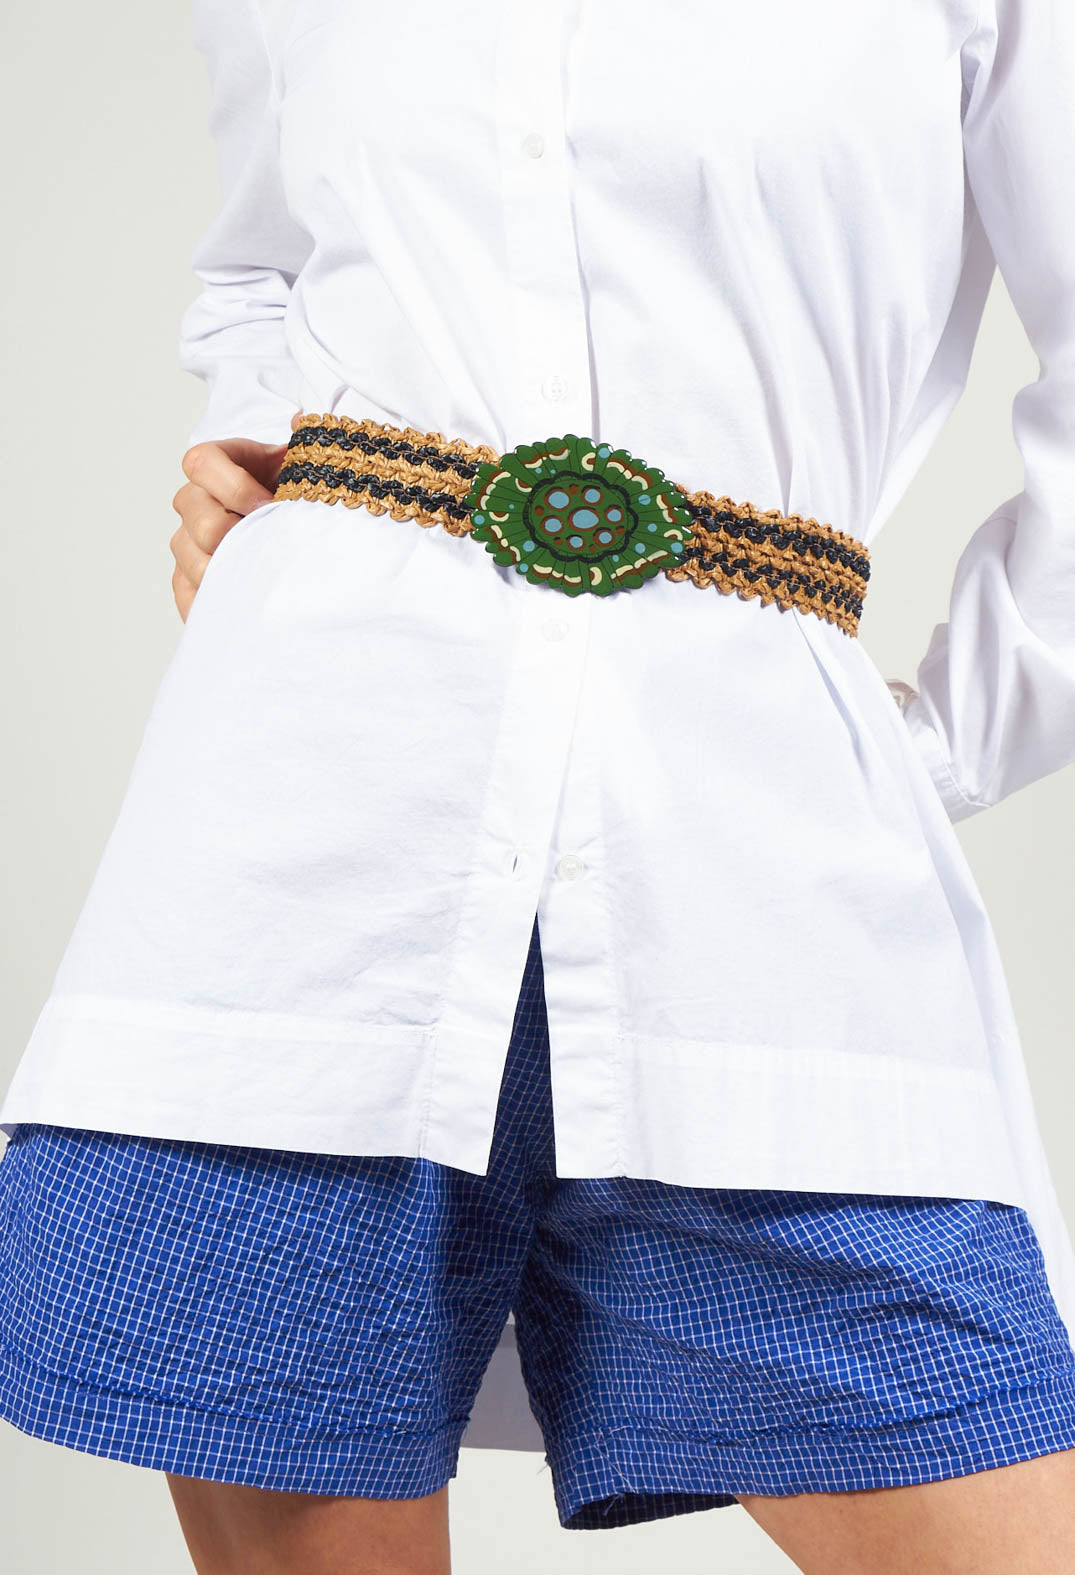 Elasticated Natural Woven Belt with Large Feature Buckle